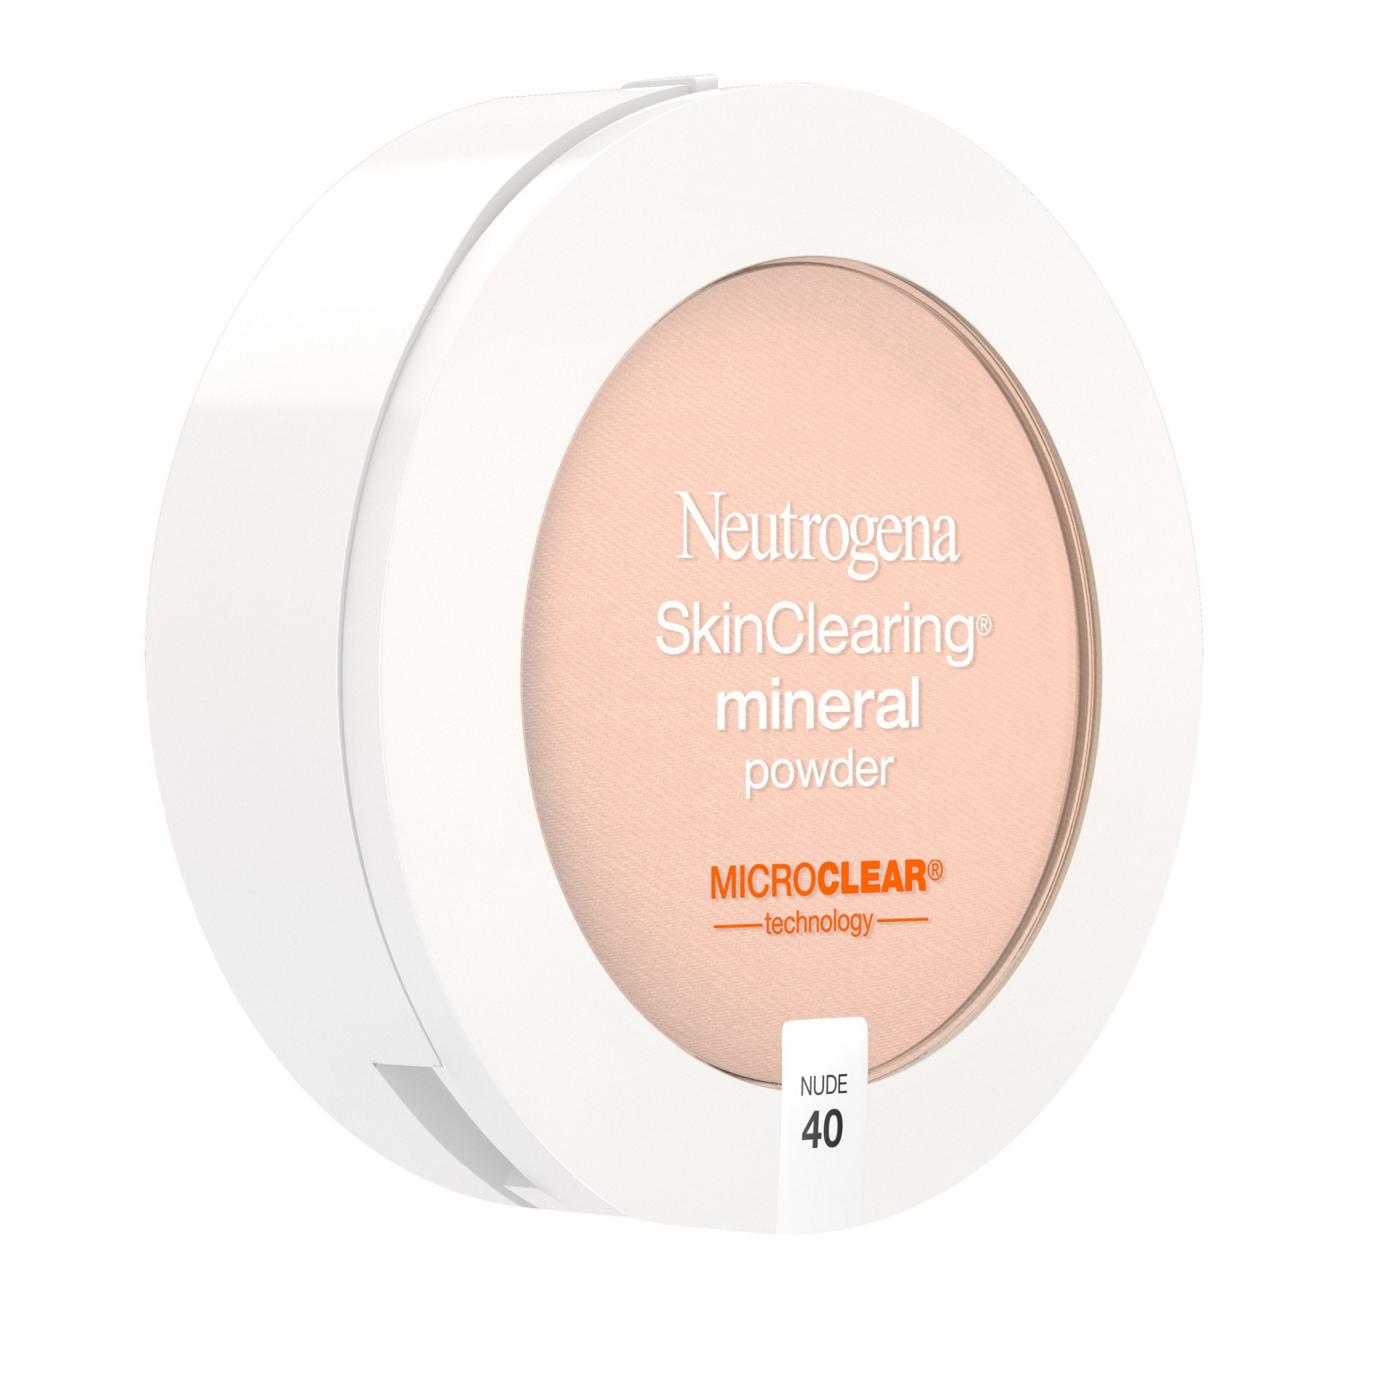 Neutrogena Skinclearing Mineral Powder 40 Nude; image 2 of 5